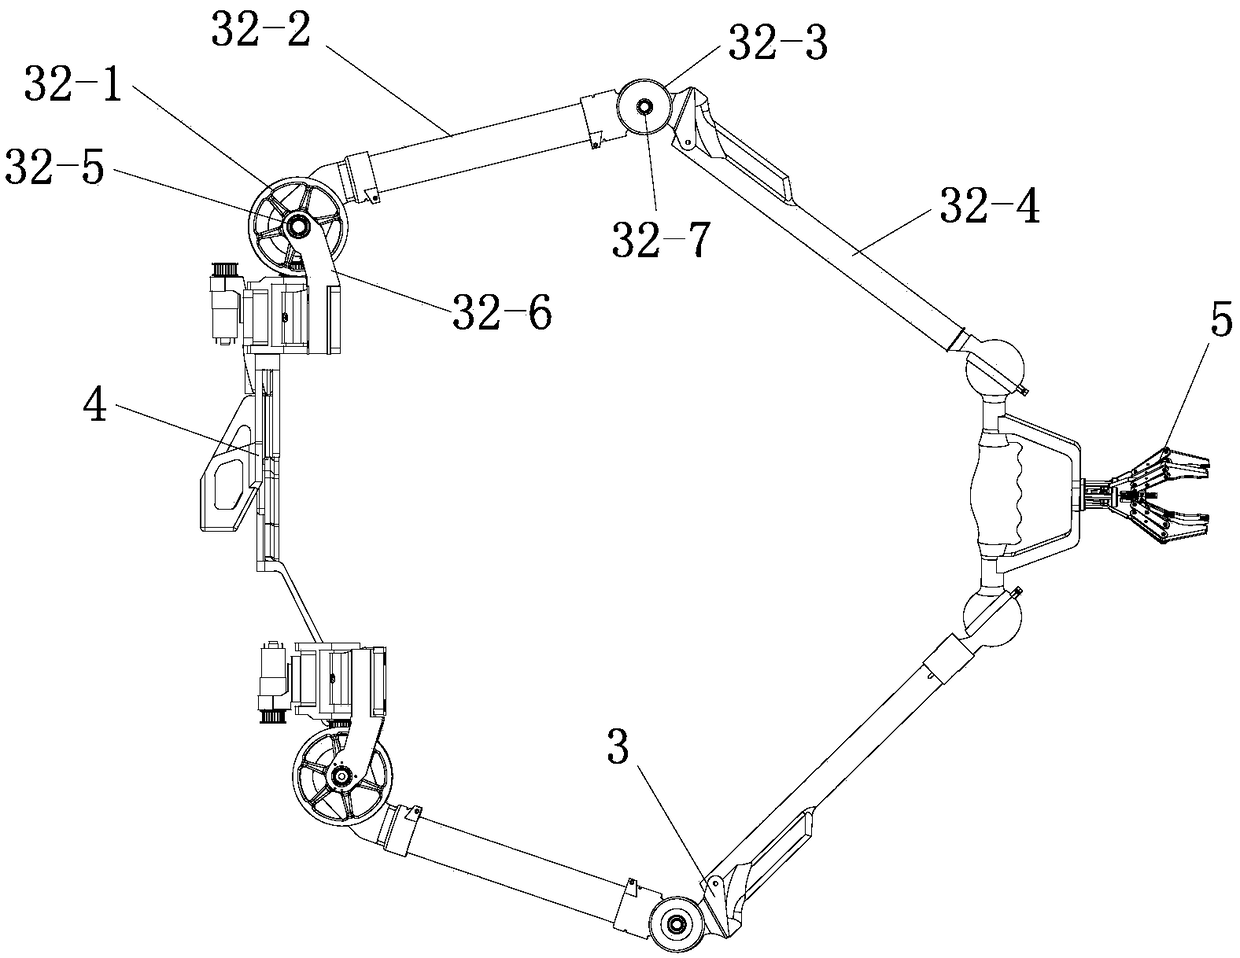 Wearable variable-configuration outer limb robot